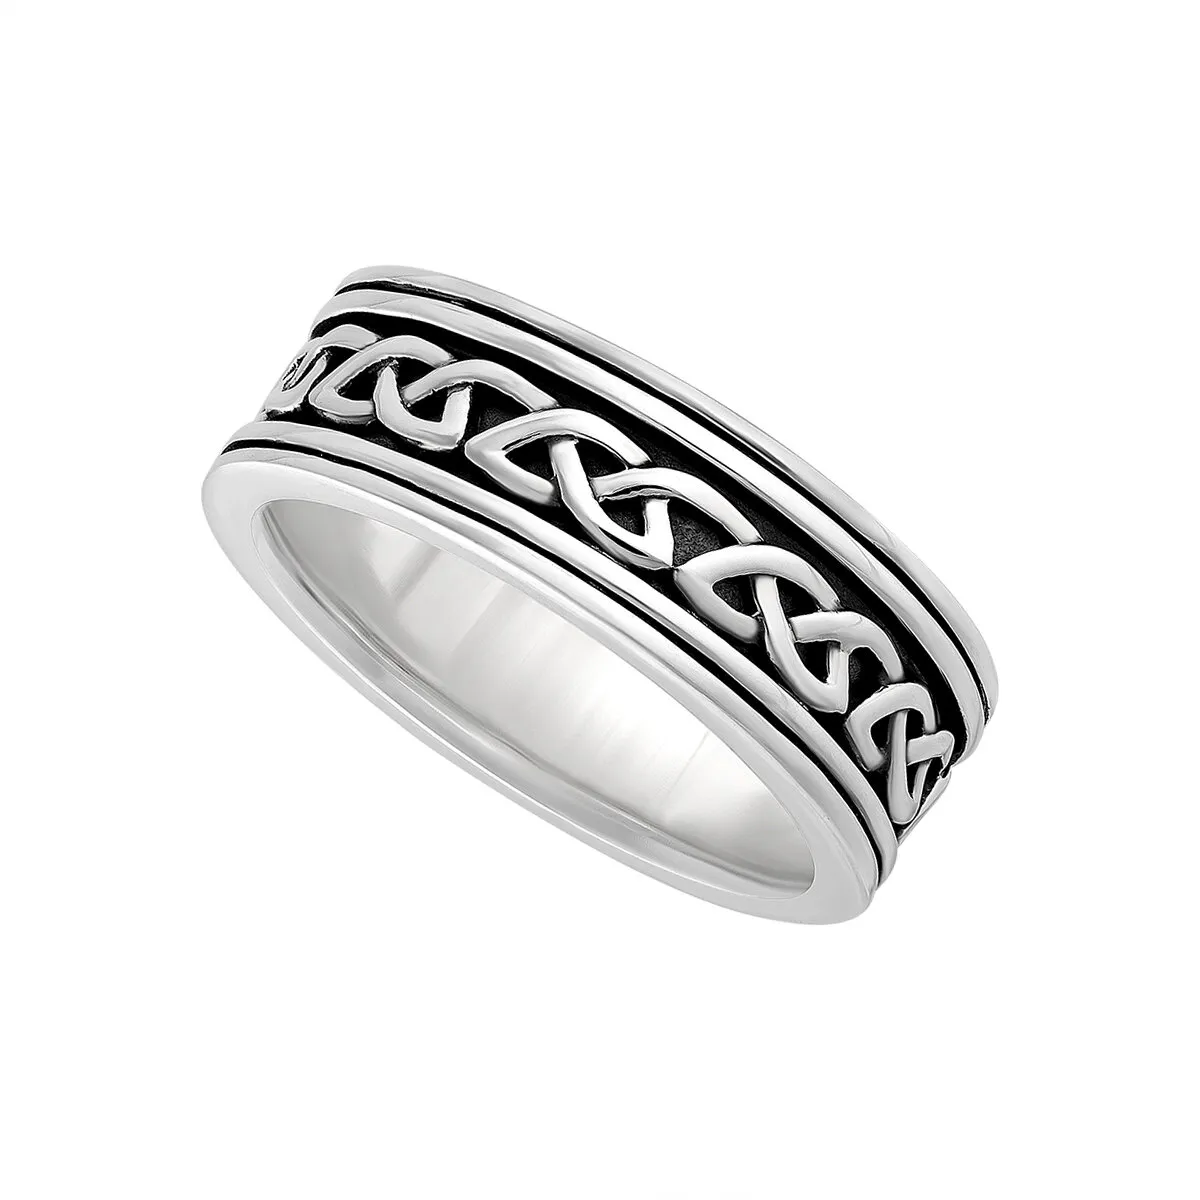 Gents Oxidised Sterling Silver Celtic Knot Ring